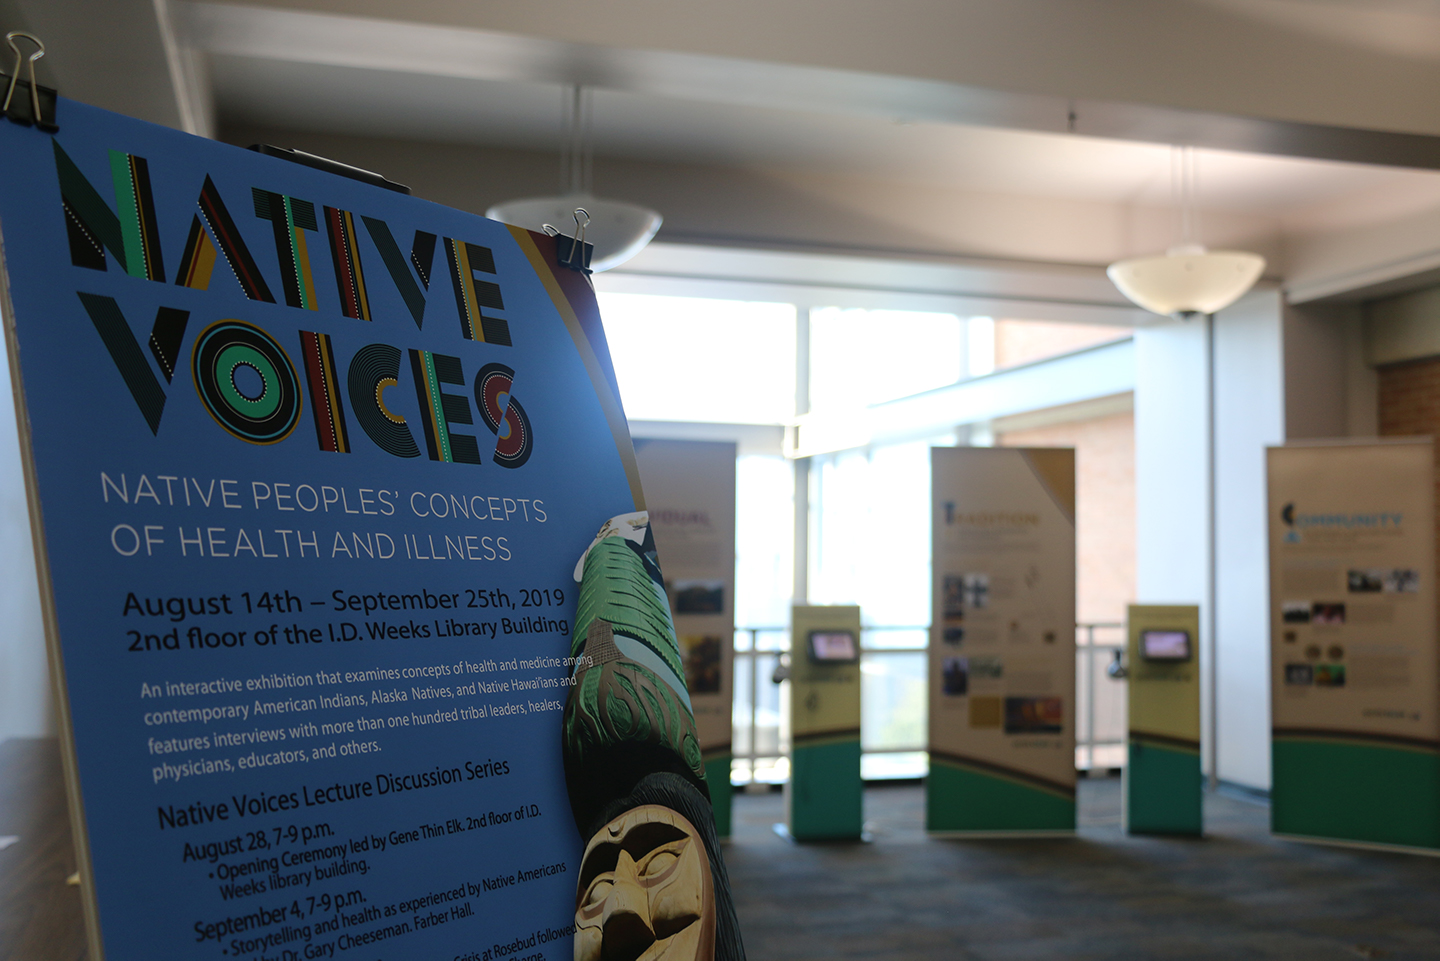 Native Voices lecture series exhibits health, wellness in Native American culture